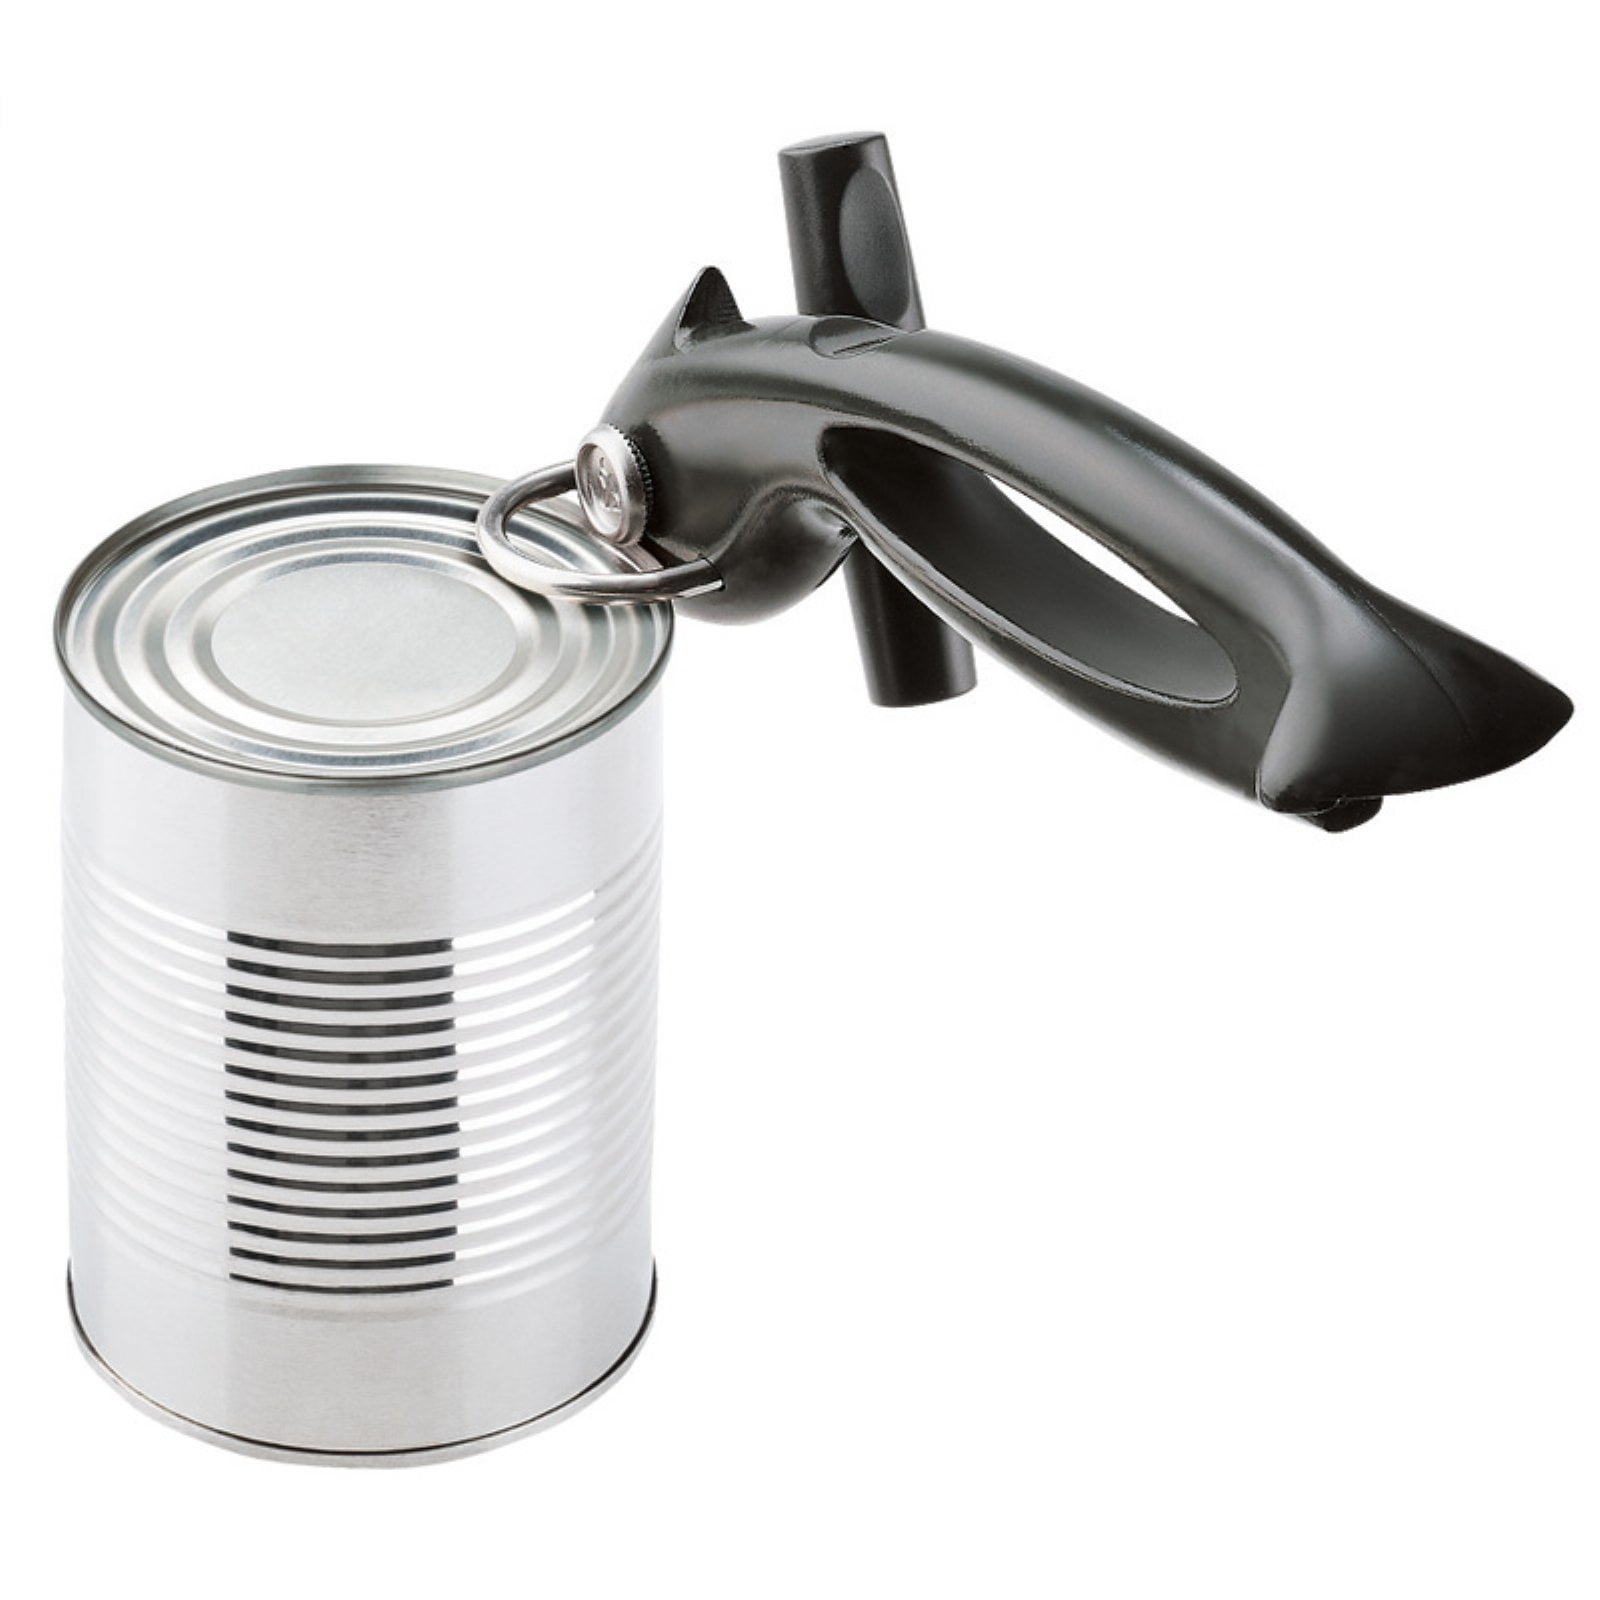 Handy Housewares Classic Compact Hand Held Metal Manual Can Opener with  Built-In Bottle Top Remover